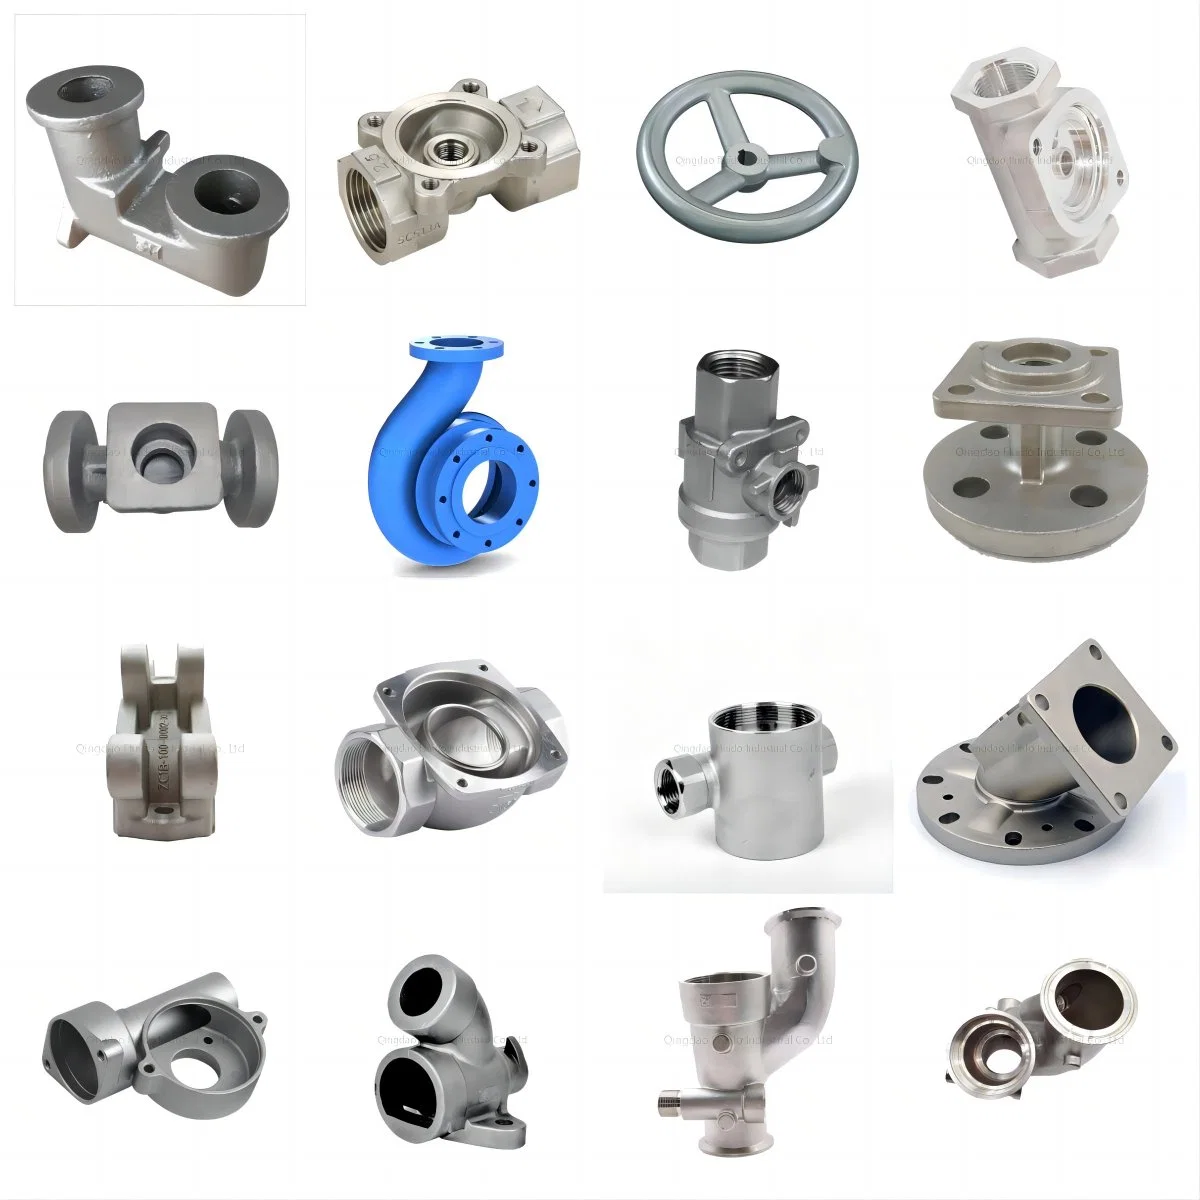 High-Performance Die Casting/Sand Casting/ Lost Foam Casting/Investment Casting Products and Service